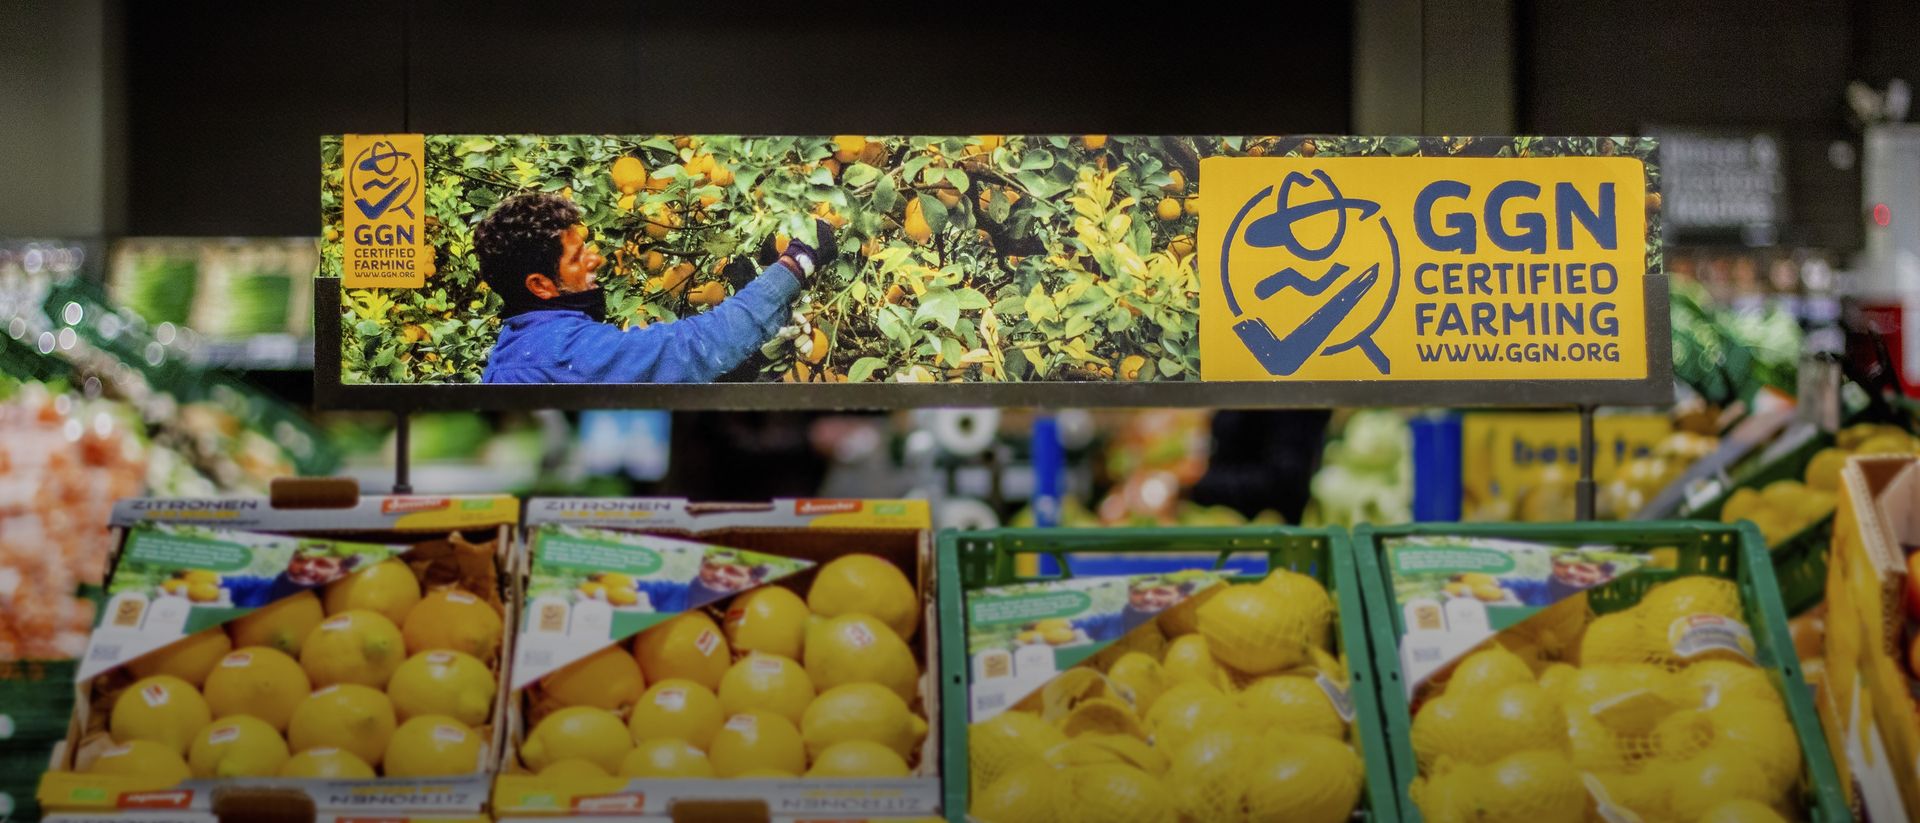 Image of a stand displaying lemons with the GGN label at a GLOBUS store in Germany